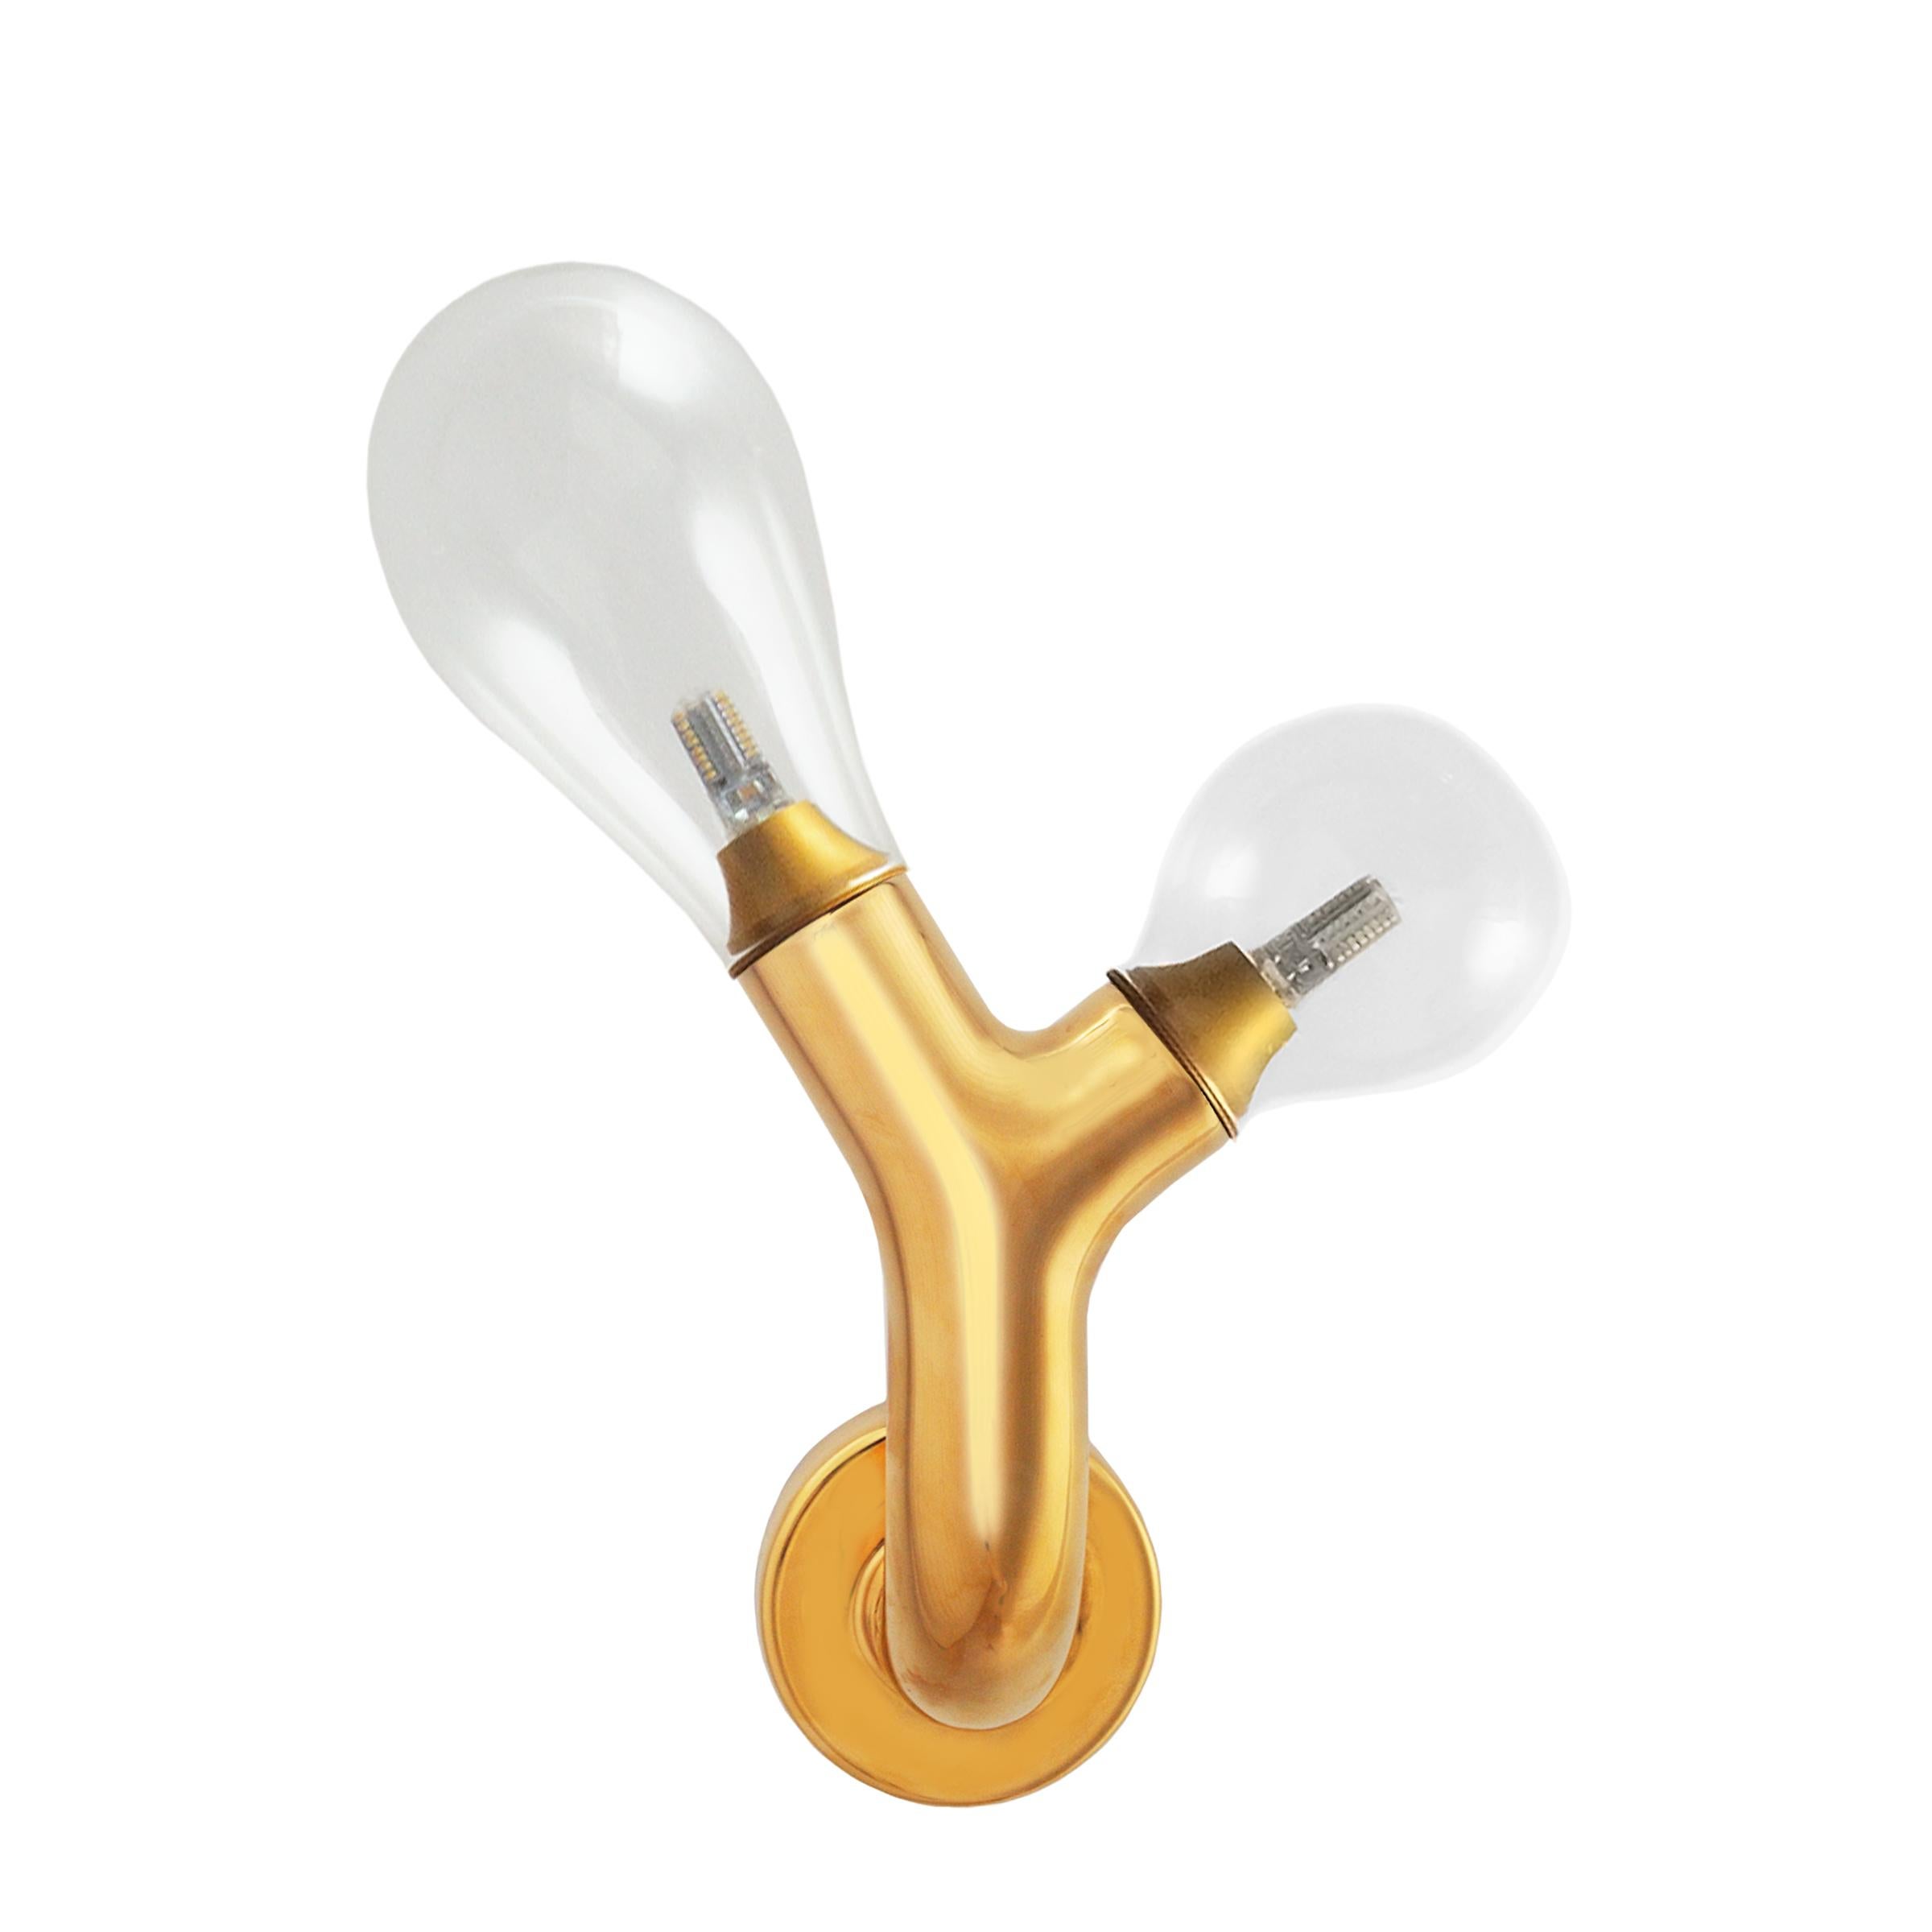 The Double Bulb Gold Plated Murano Glass Wall Light by Matteo Cibic is a Classic wall light with two bulbs.

One summer, Matteo Cibic along with the founding duo of Scarlet Splendour, travelled through Italy. During their days spent within the